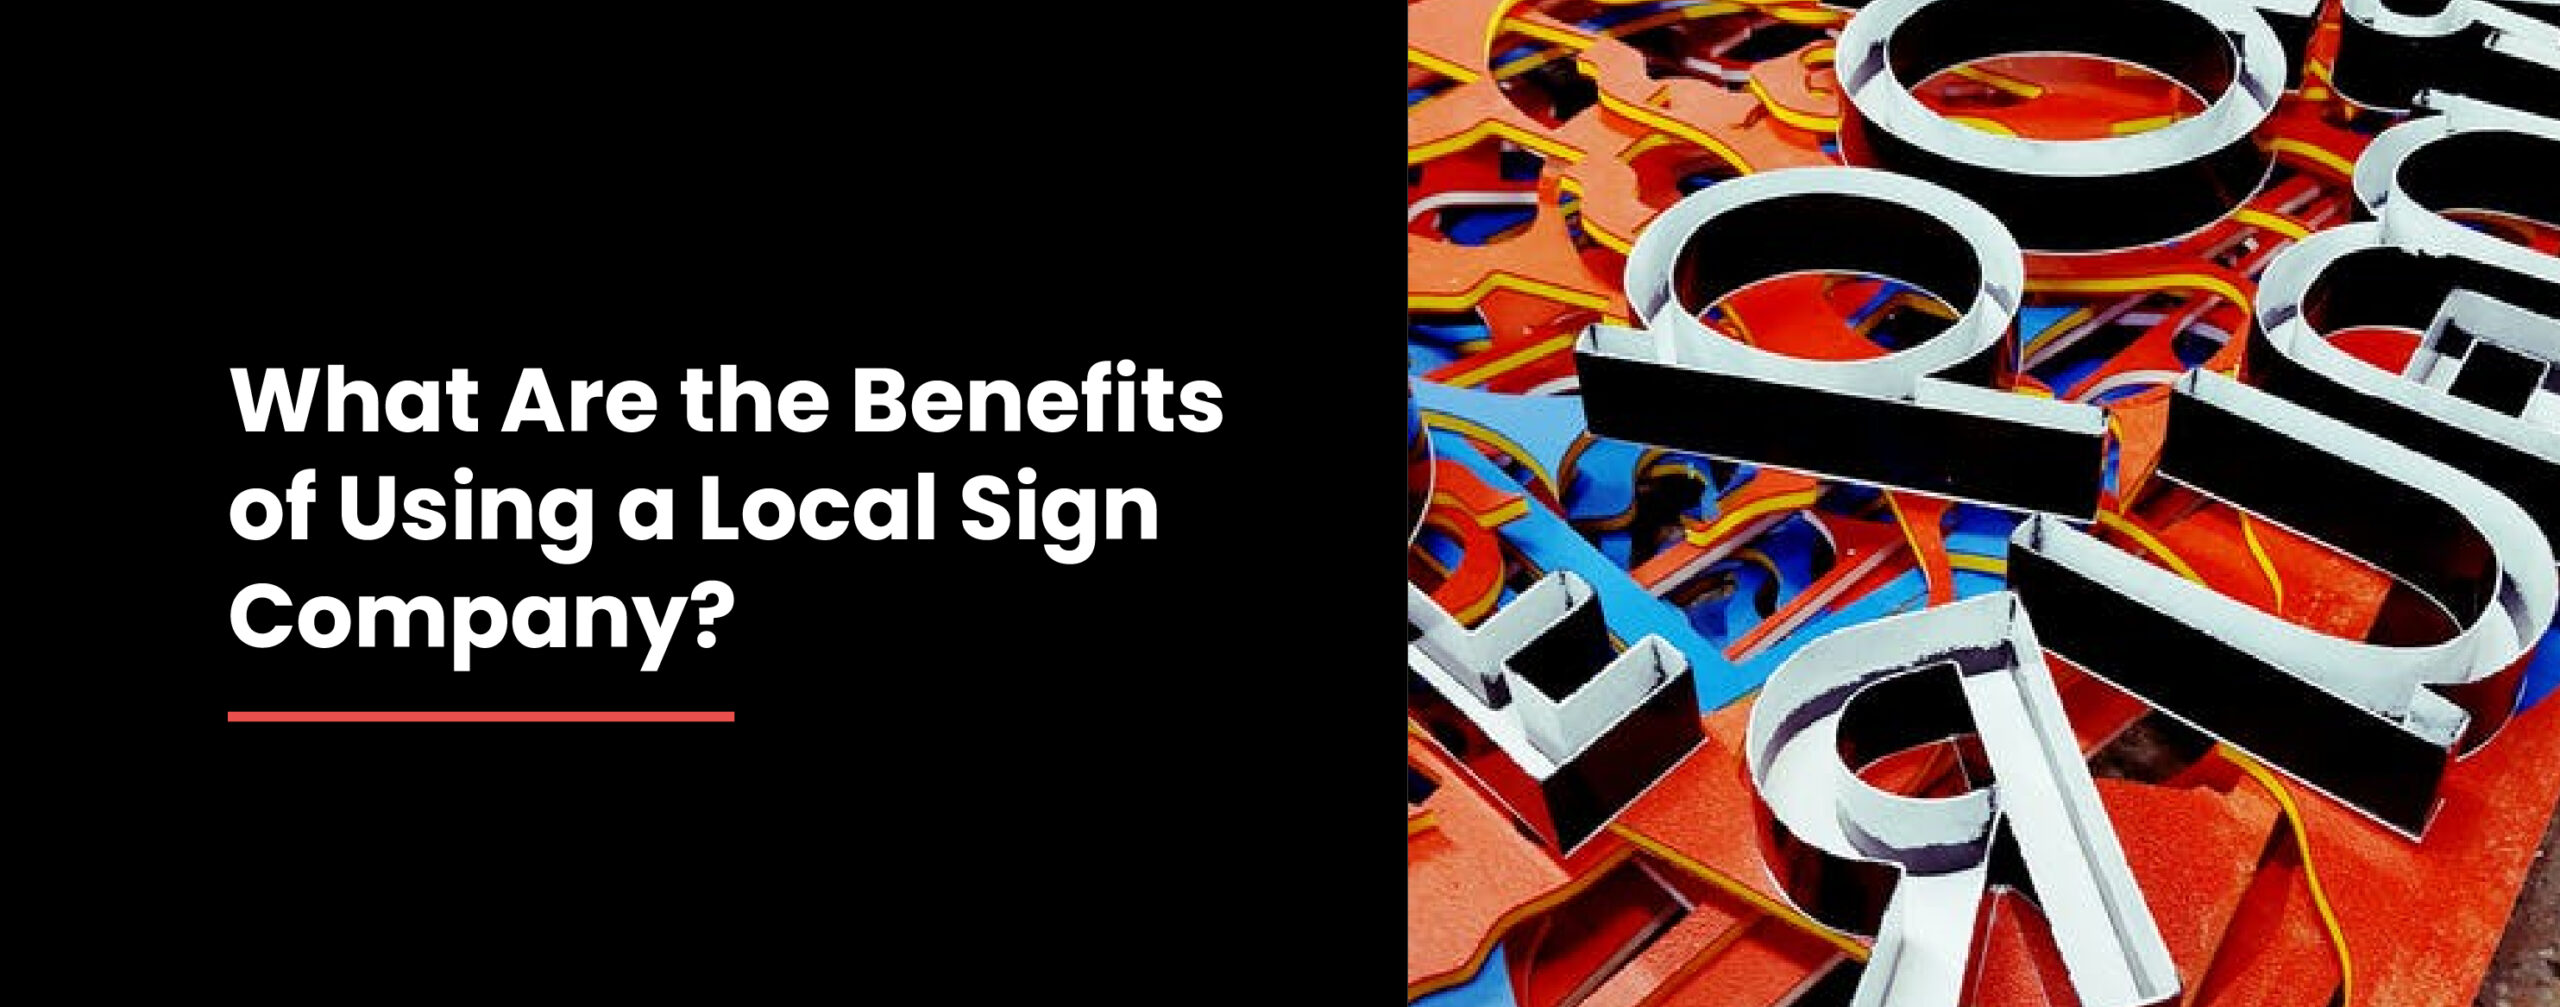 What Are the Benefits of Using a Local Sign Company? 